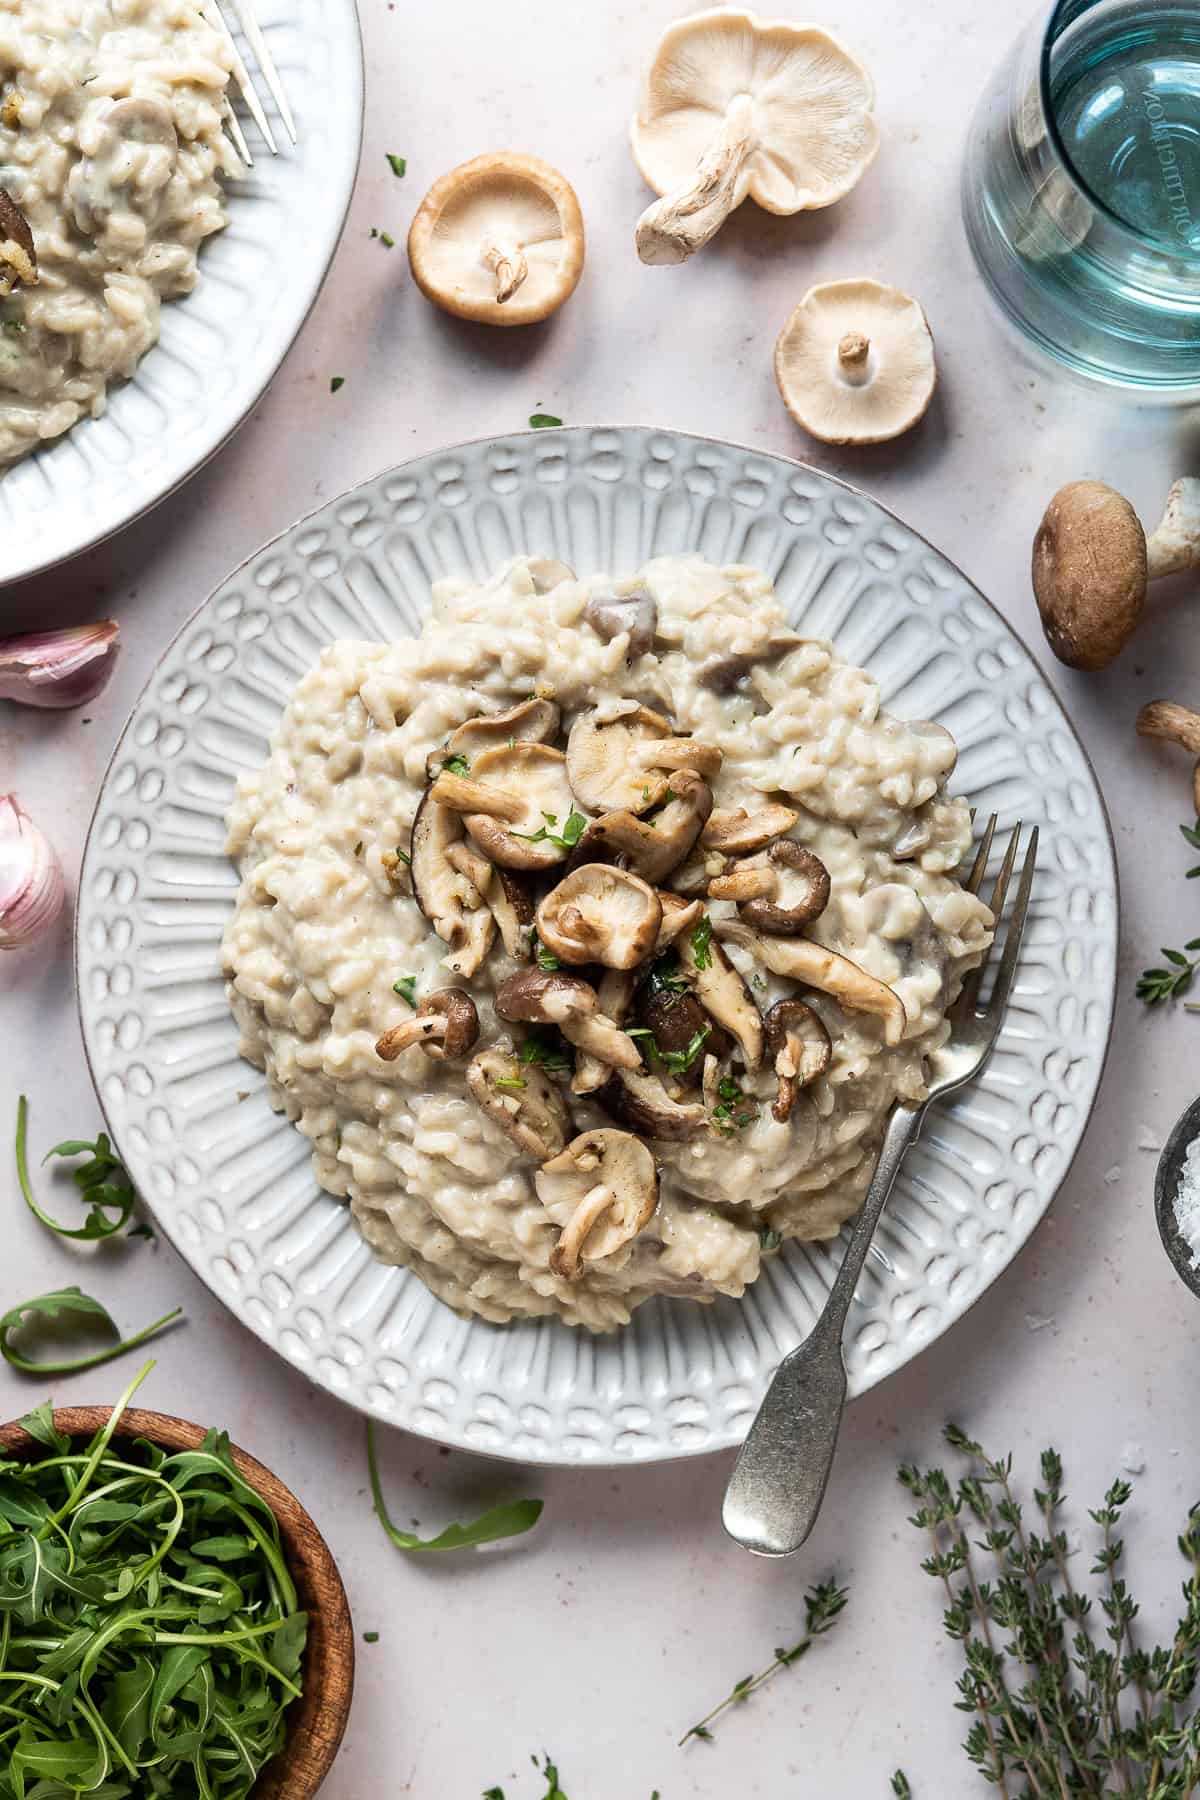 A plate of vegan mushroom risotto surrounded by a bowl of rocket, fresh thyme, garlic skins, a glass of water and some raw mushrooms.